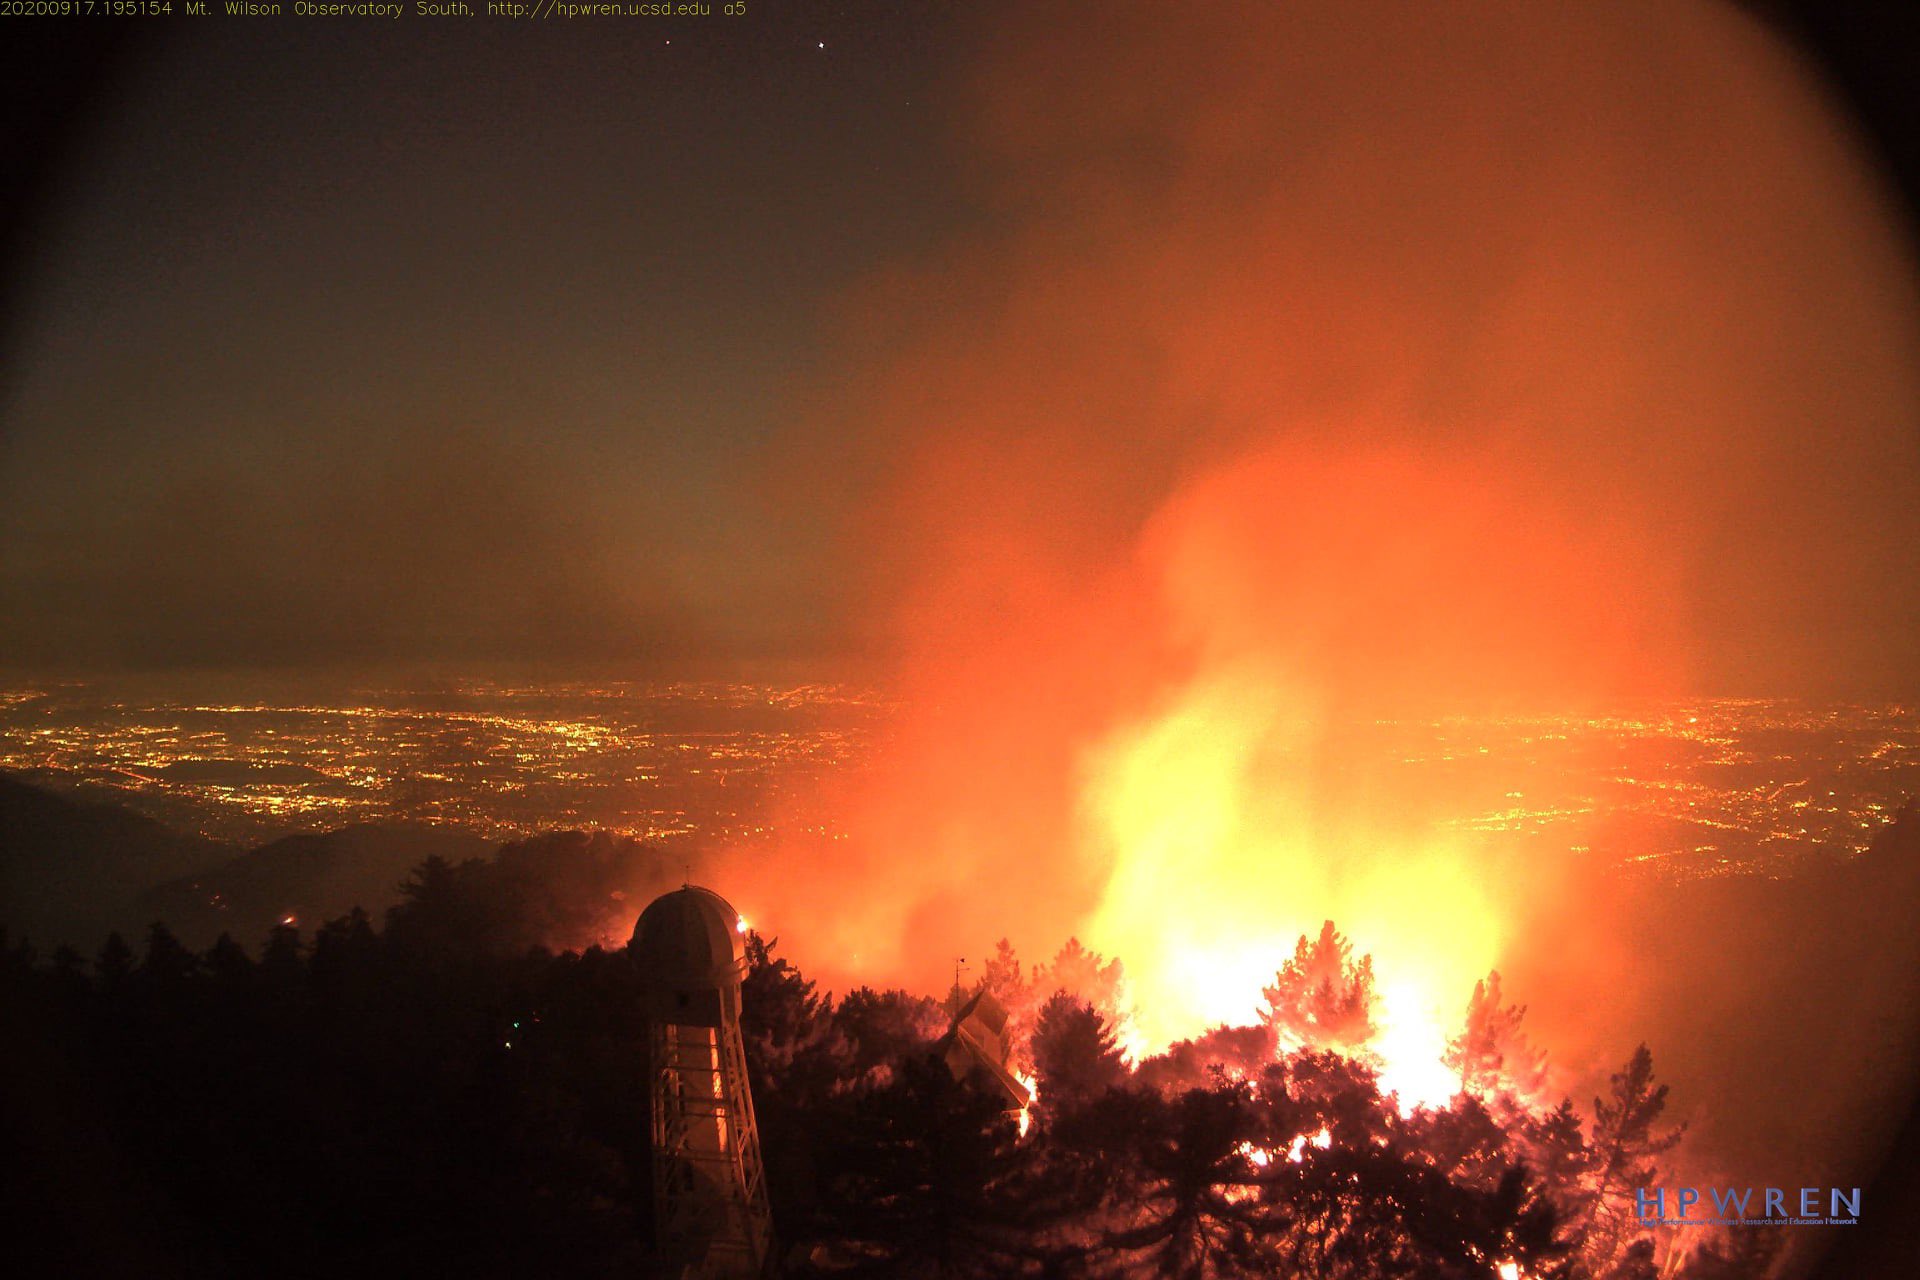 Ancient Mount Wilson Observatory survives terminate call with Southern California’s Bobcat Fire